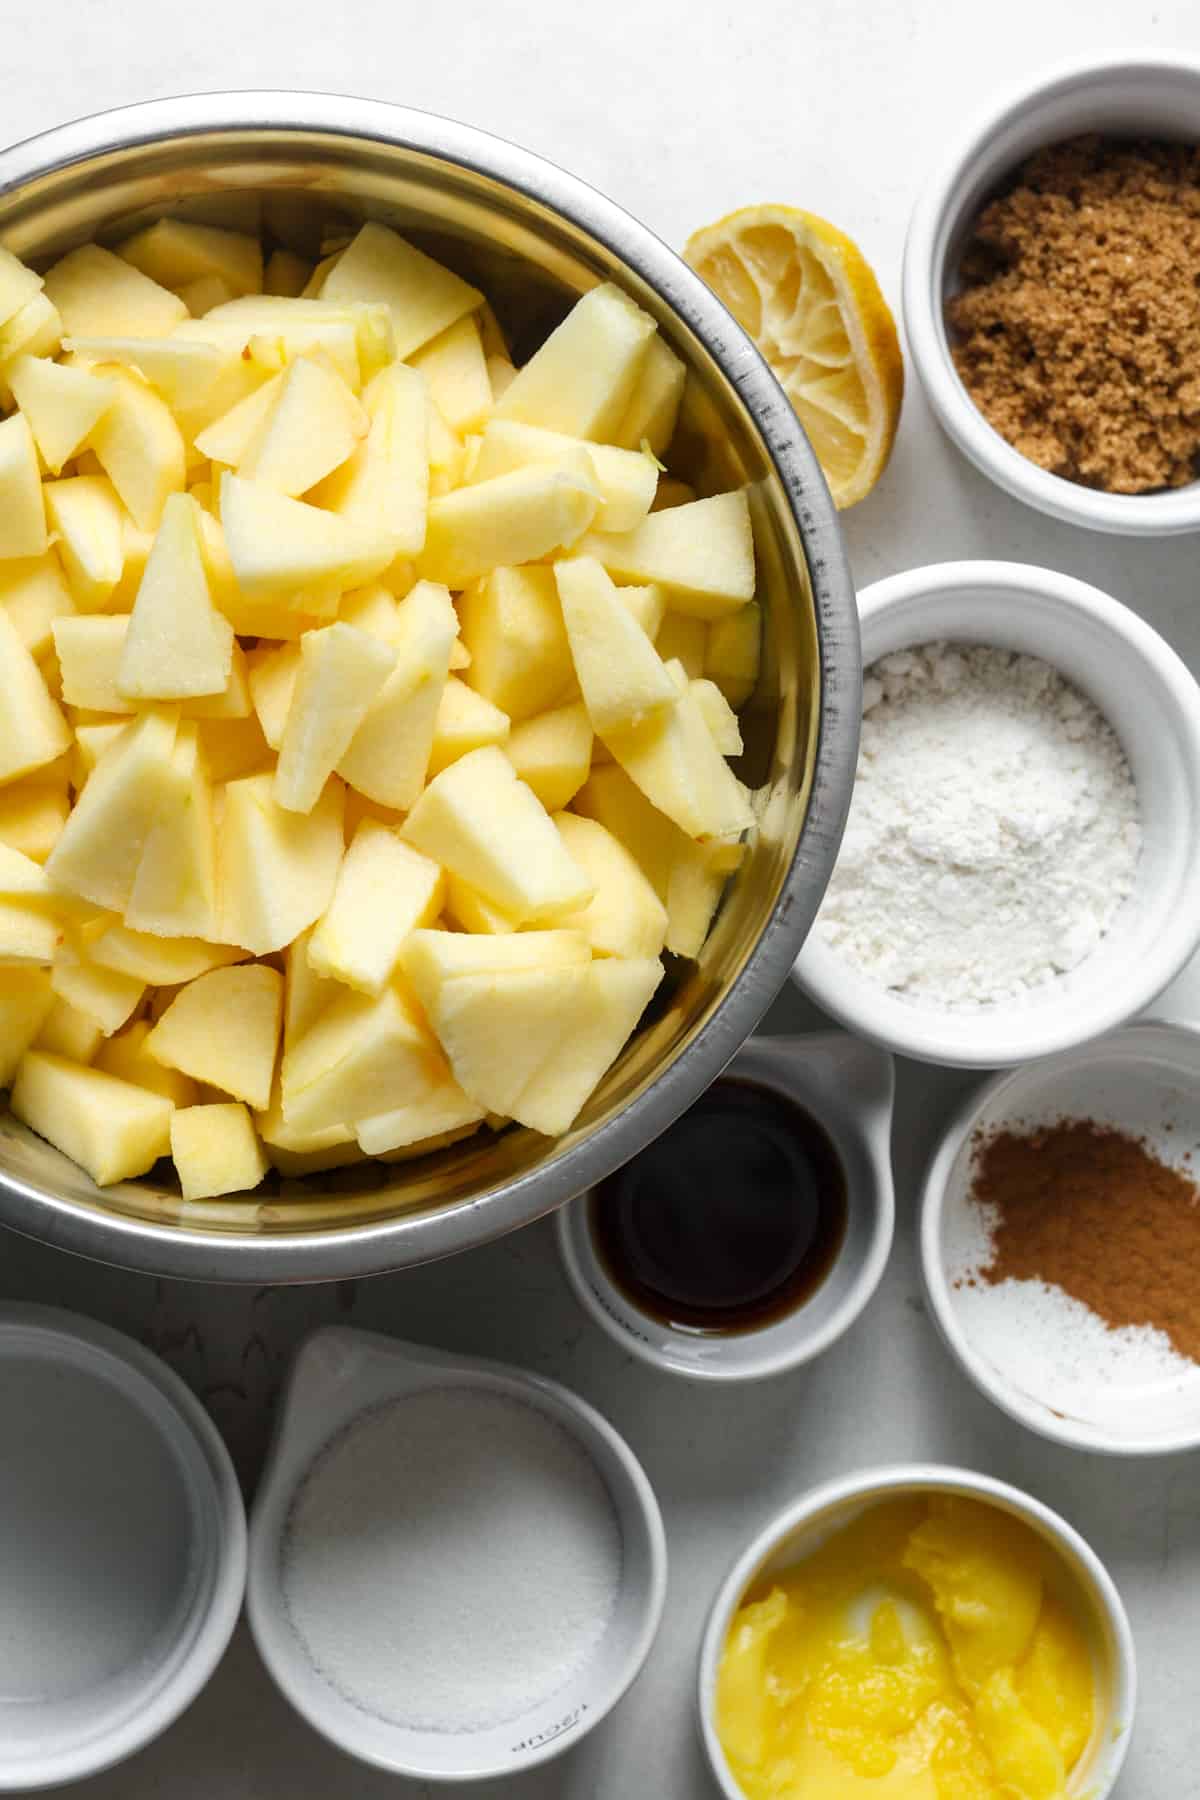 Apples, spices and other ingredients.